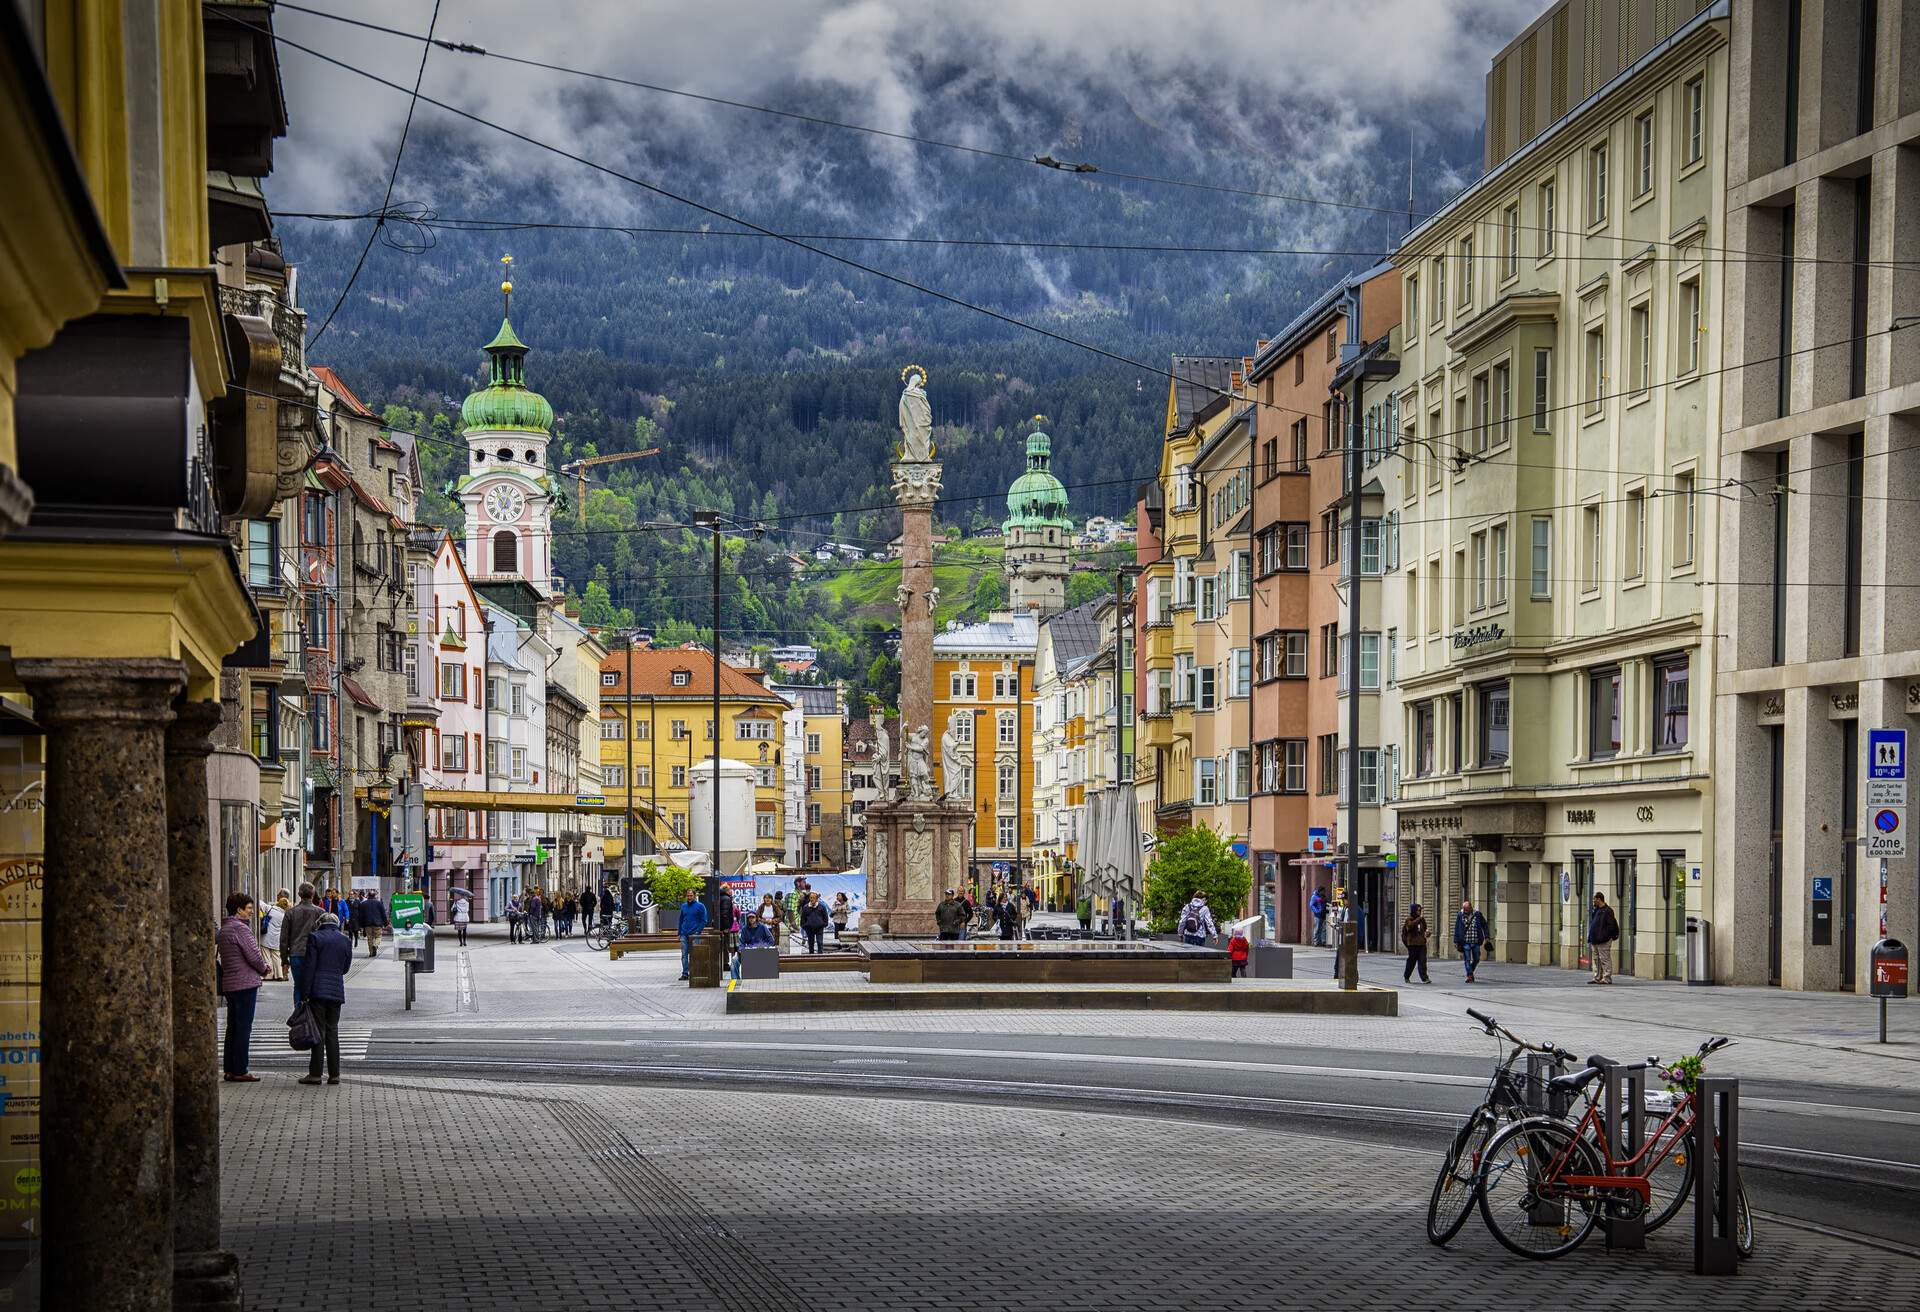 Market square of Old town of Innsbruck, Austria.